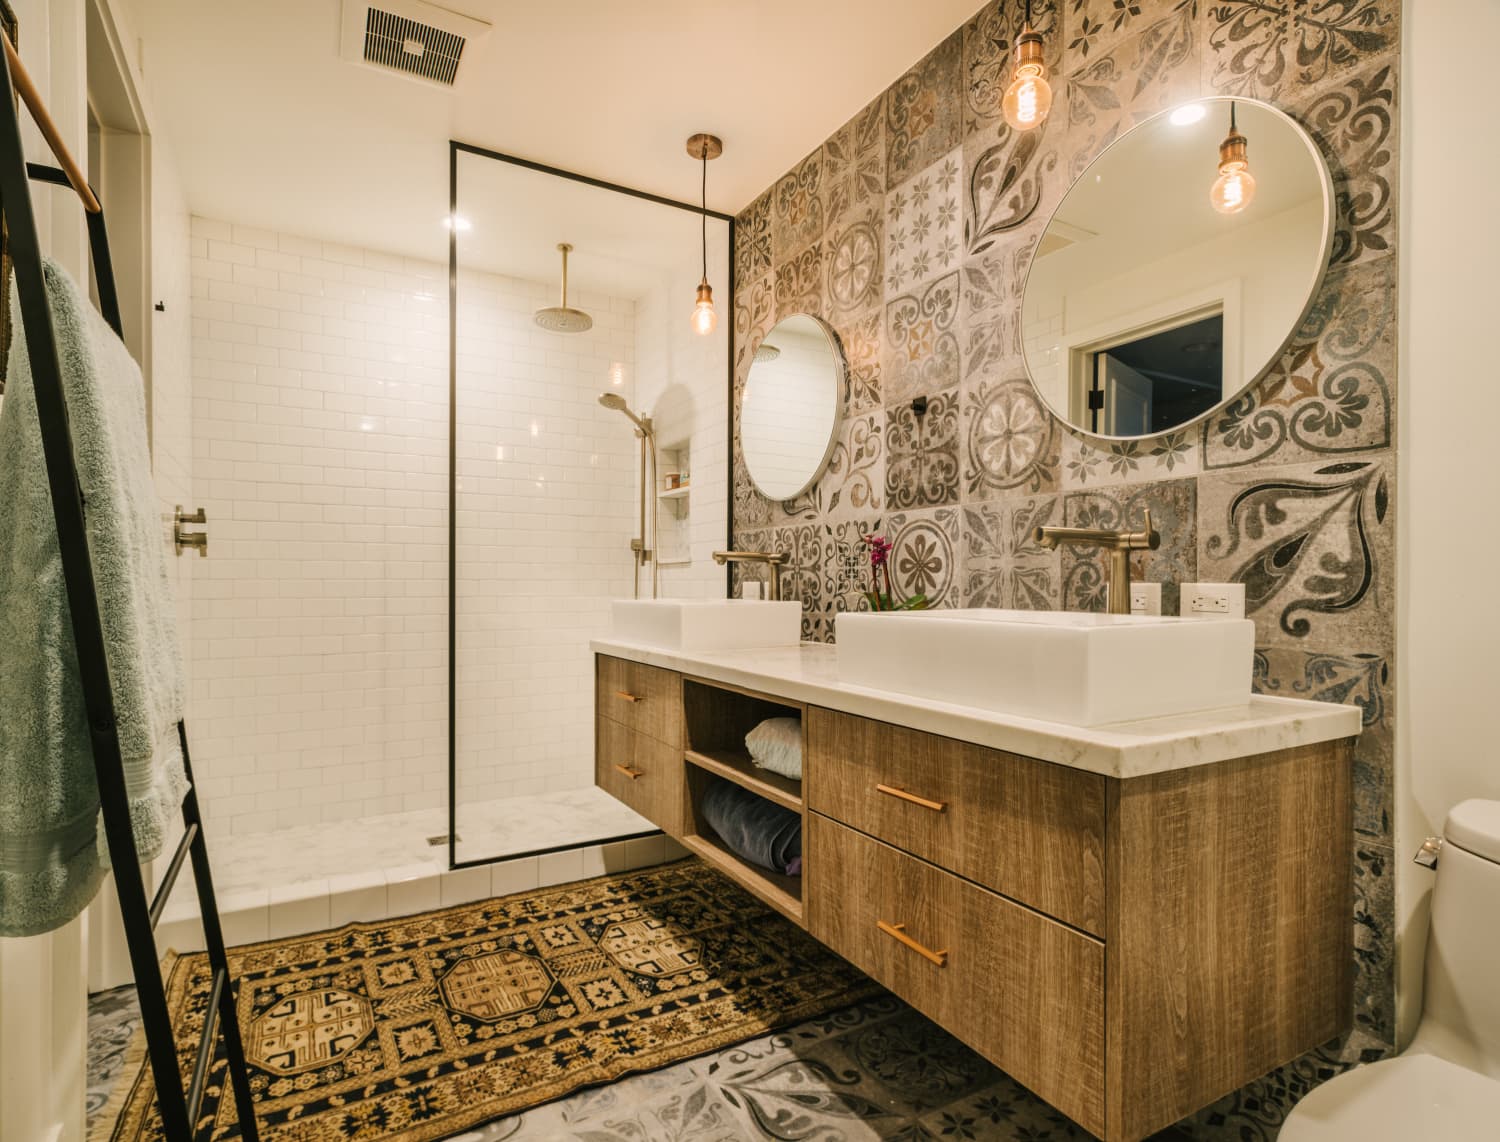 10 Beautiful Bathrooms You Might Want to Copy For Your Own Home